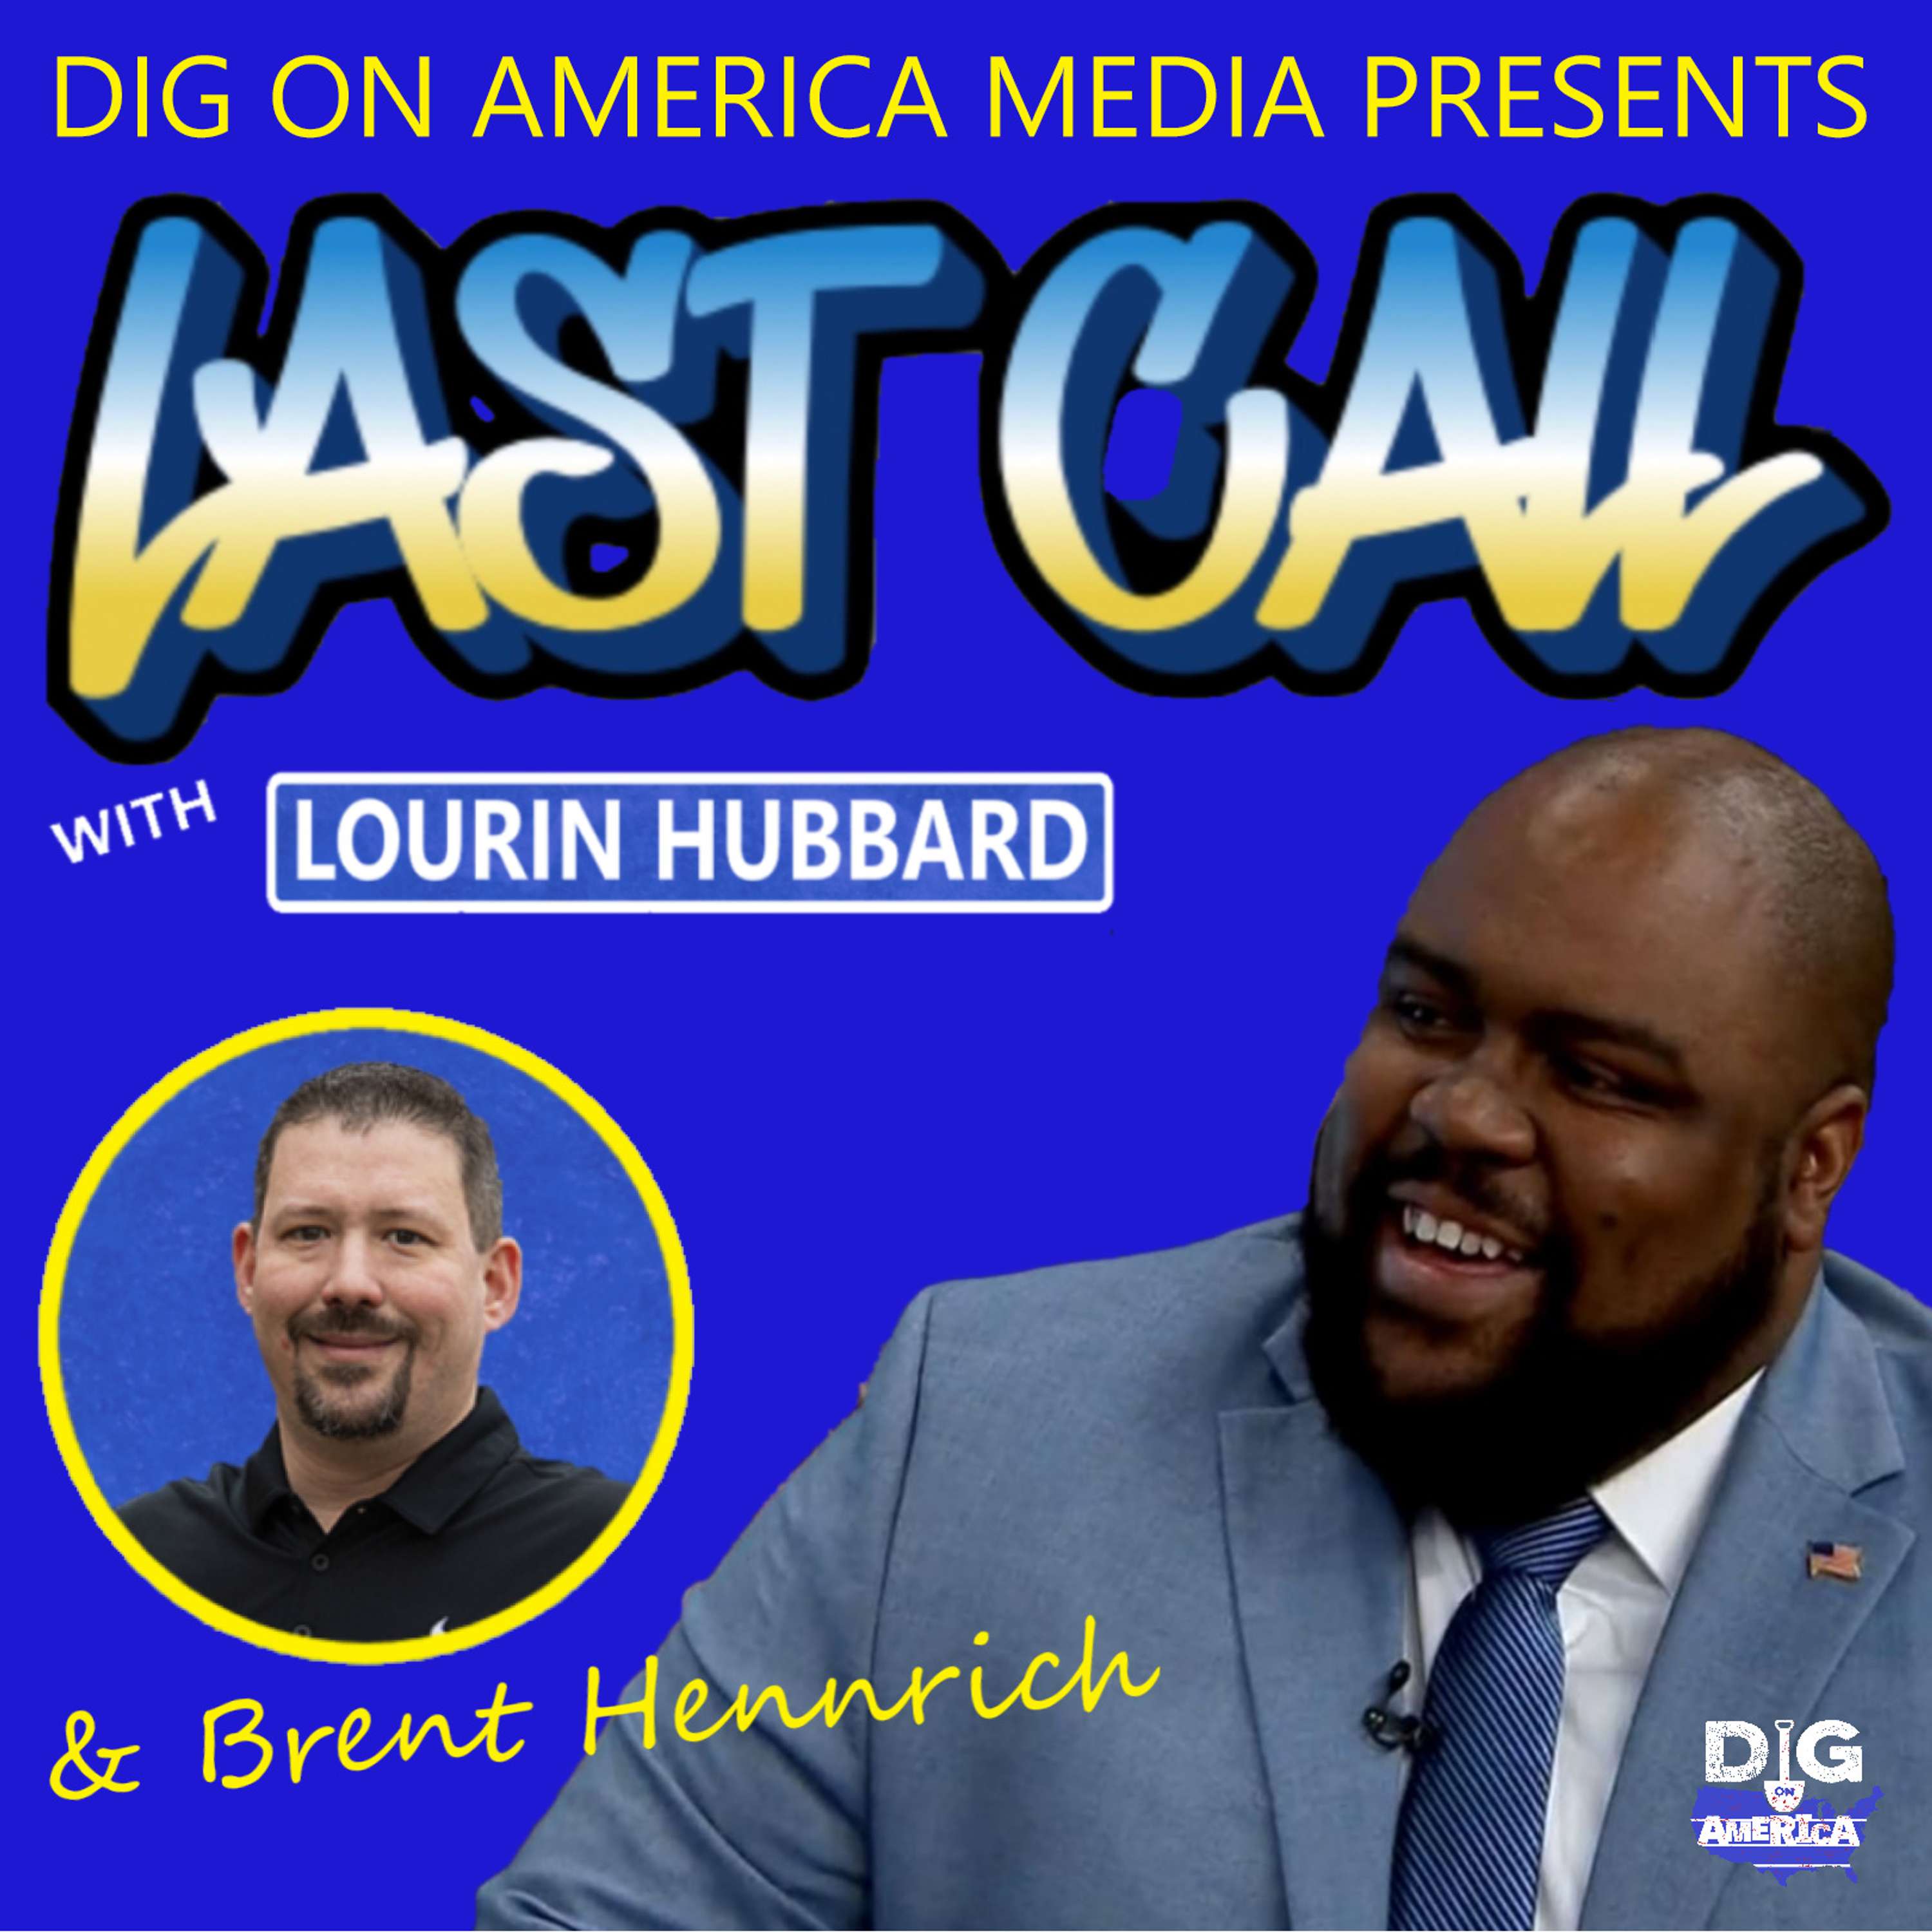 Last Call with Lourin Hubbard: Amane Badhasso & Odessa Kelly